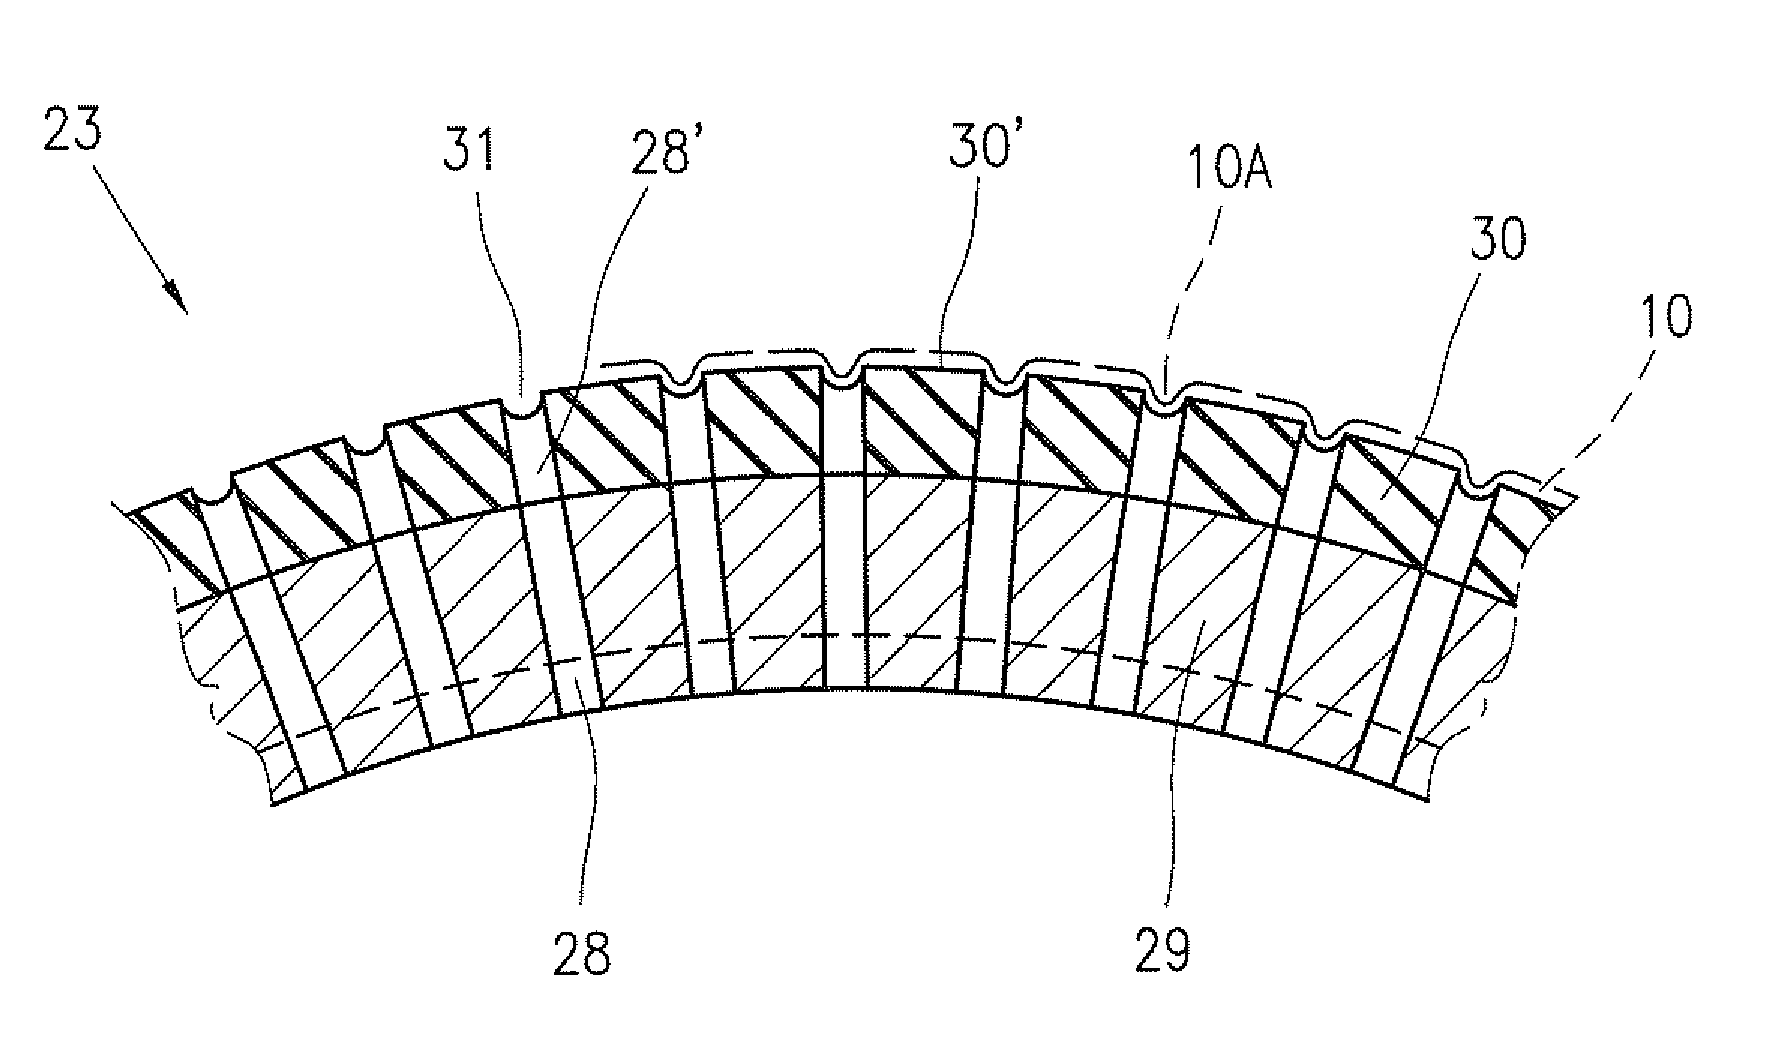 Method and apparatus for corrugating and winding up rolls of plastic film